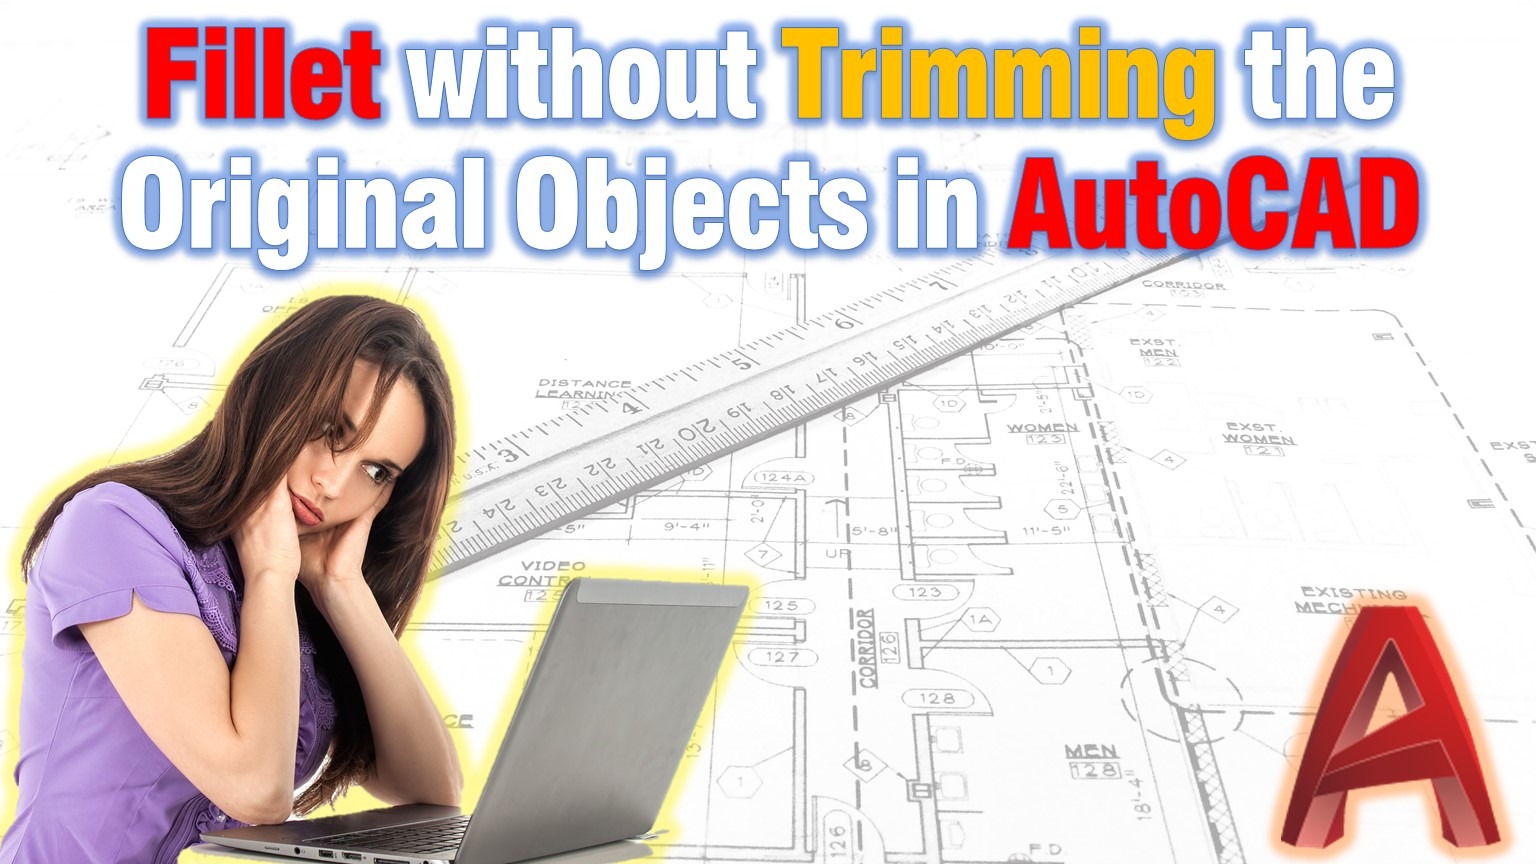 learn how to fillet without trimming original objects in autocad